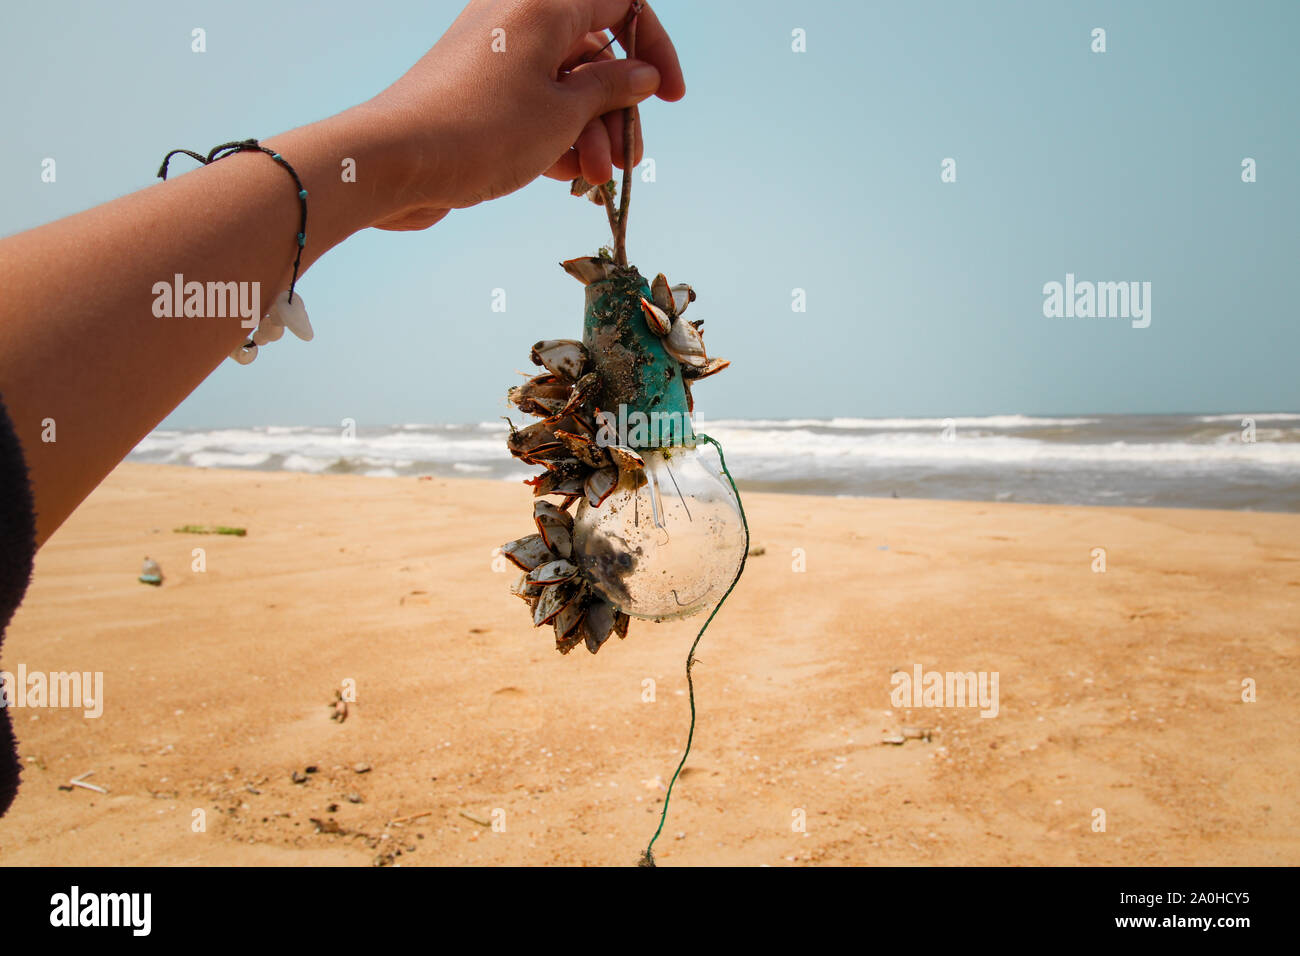 Beach clean up, fighting pollution and promoting positive changes Stock Photo